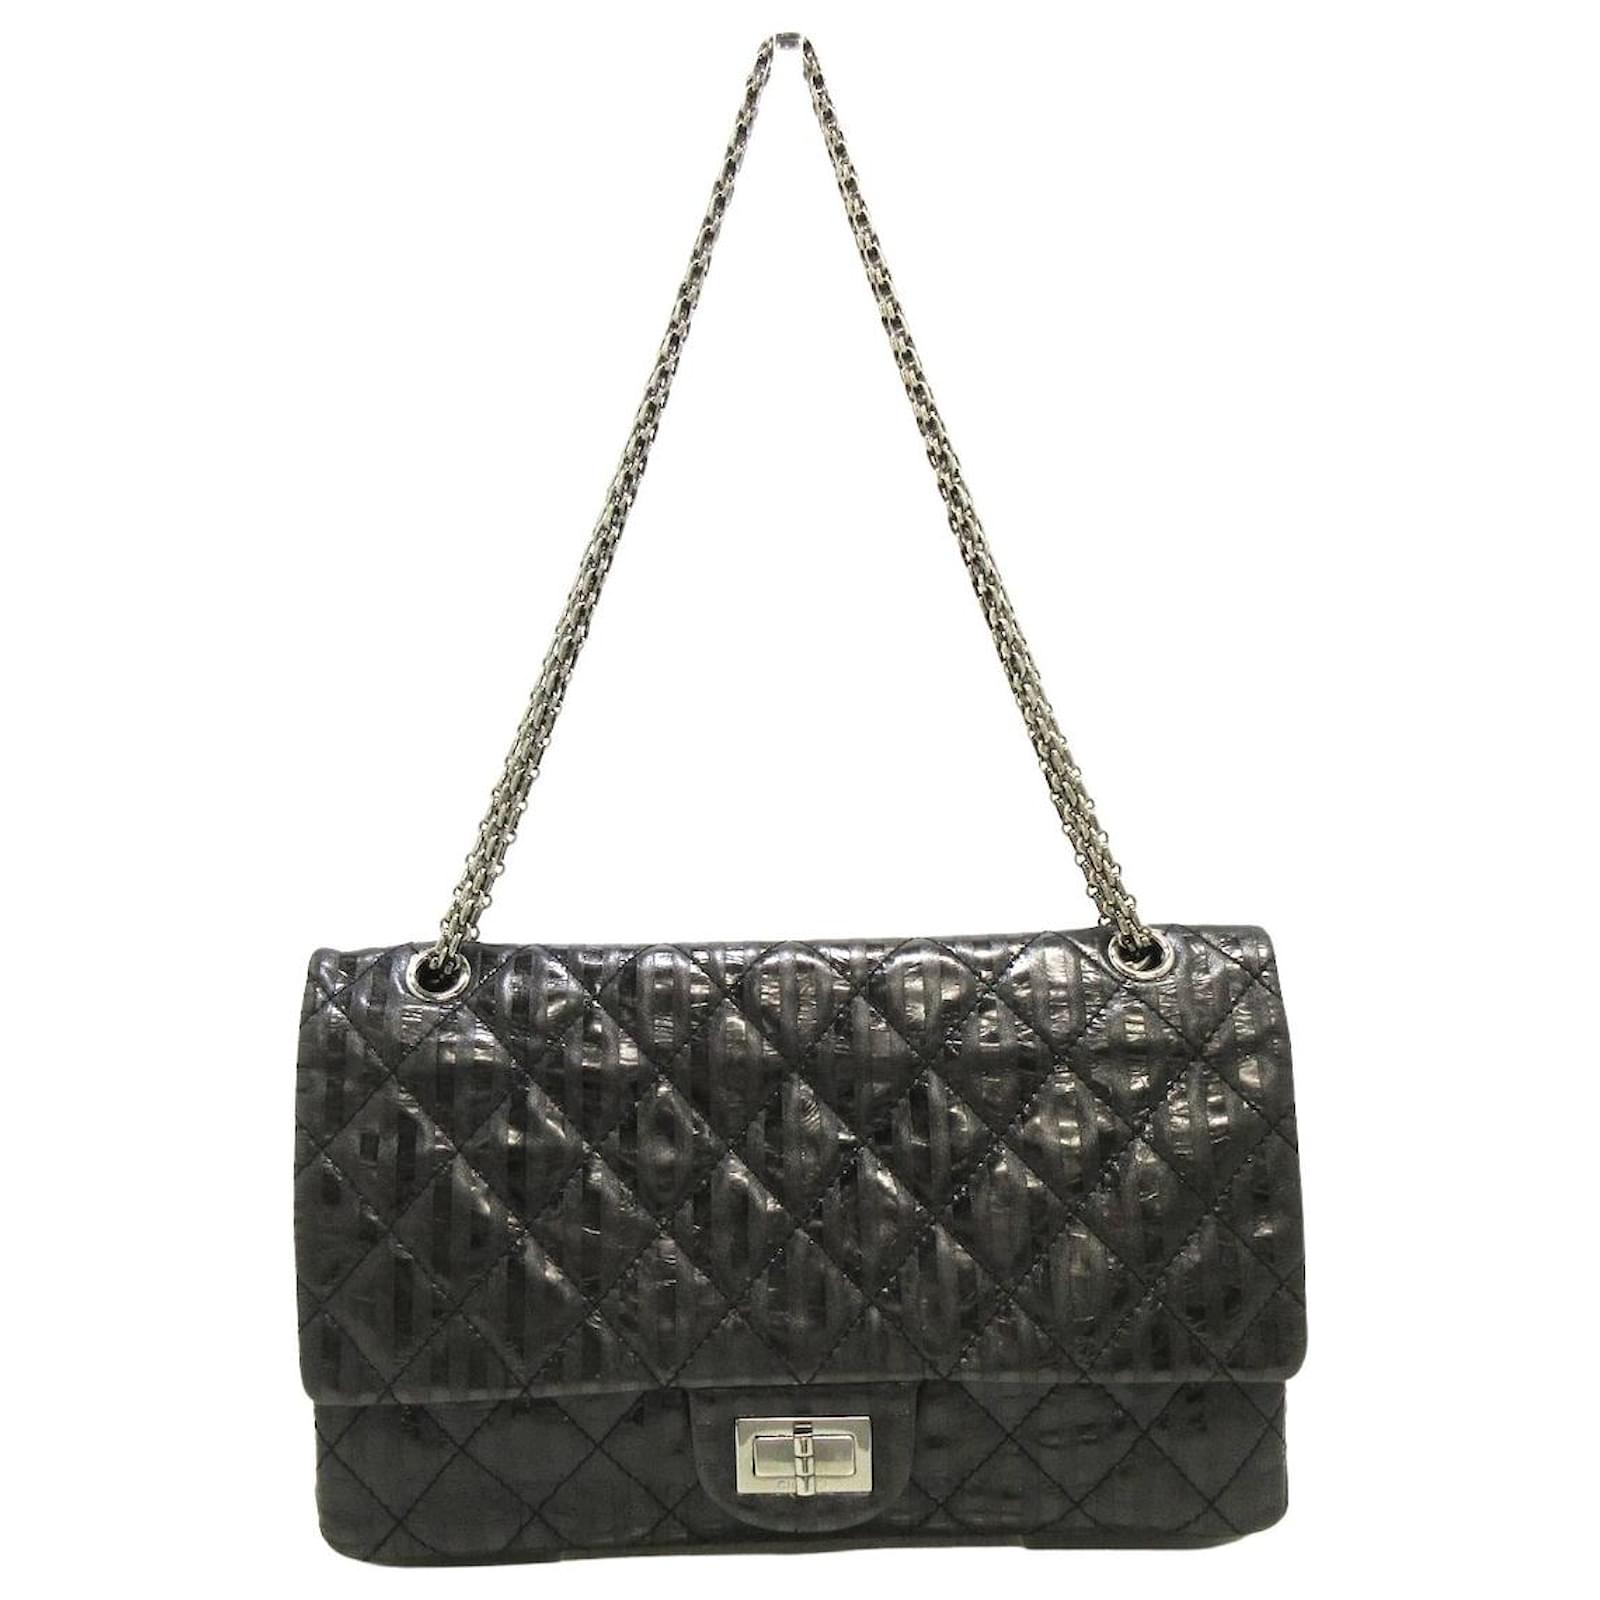 Chanel - Authenticated Handbag - Pony-Style Calfskin Black Plain for Women, Very Good Condition